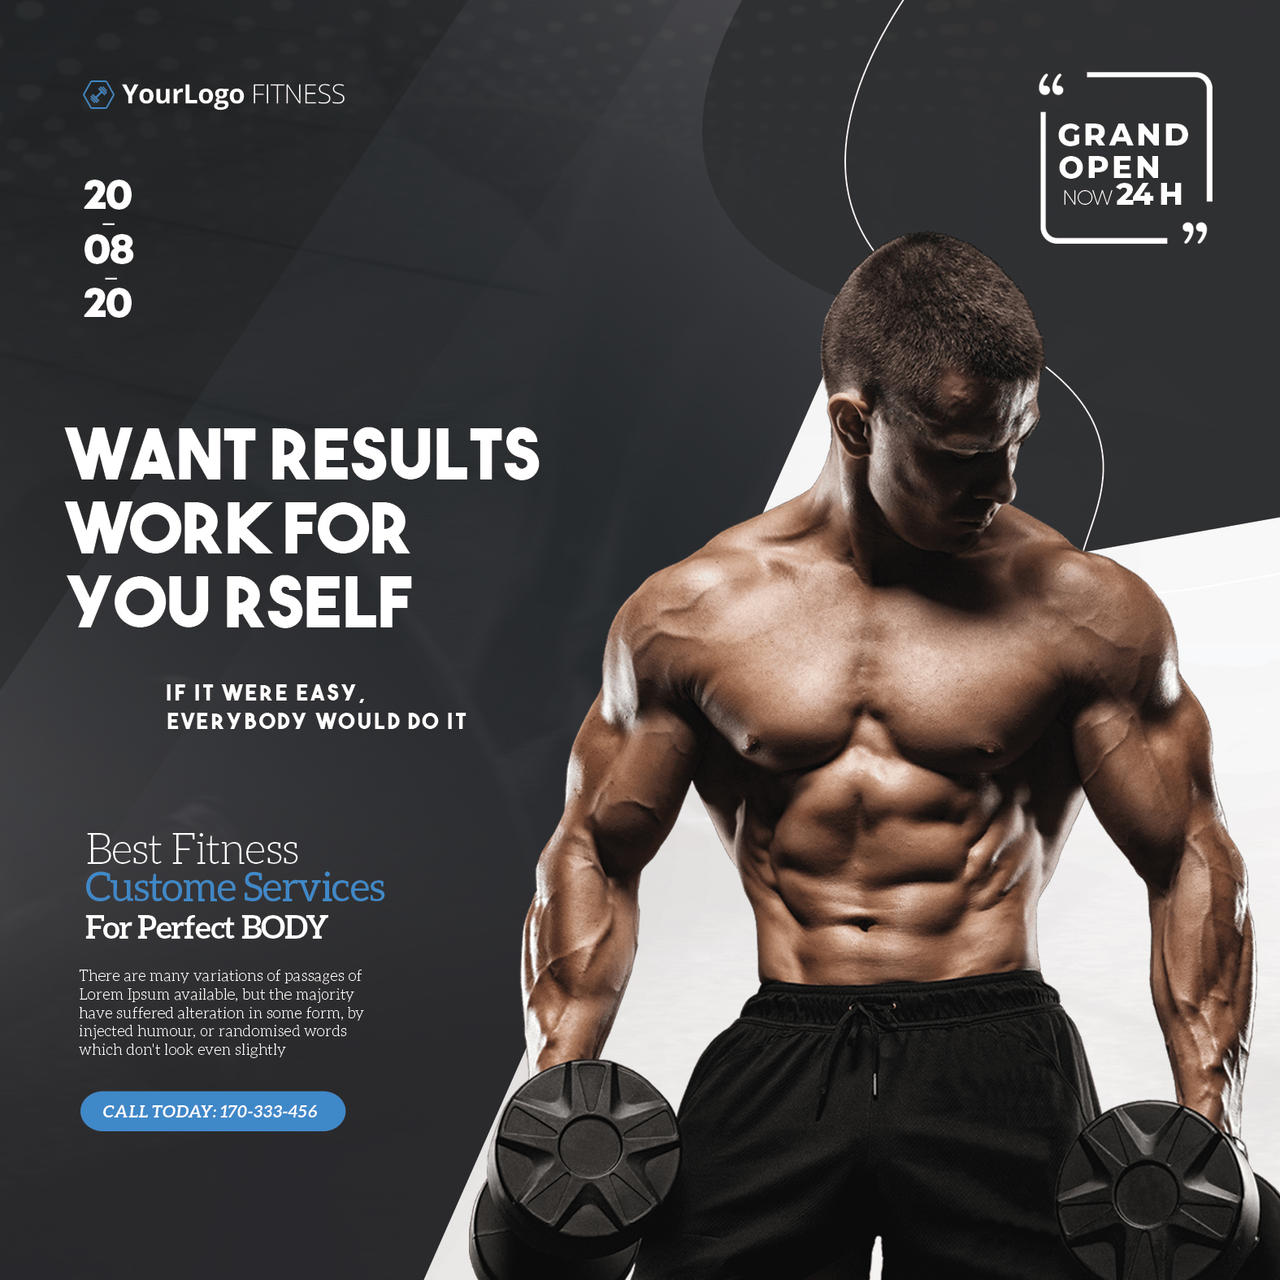 Personal Fitness Training Flyer Free PSD Template by 99flyers on